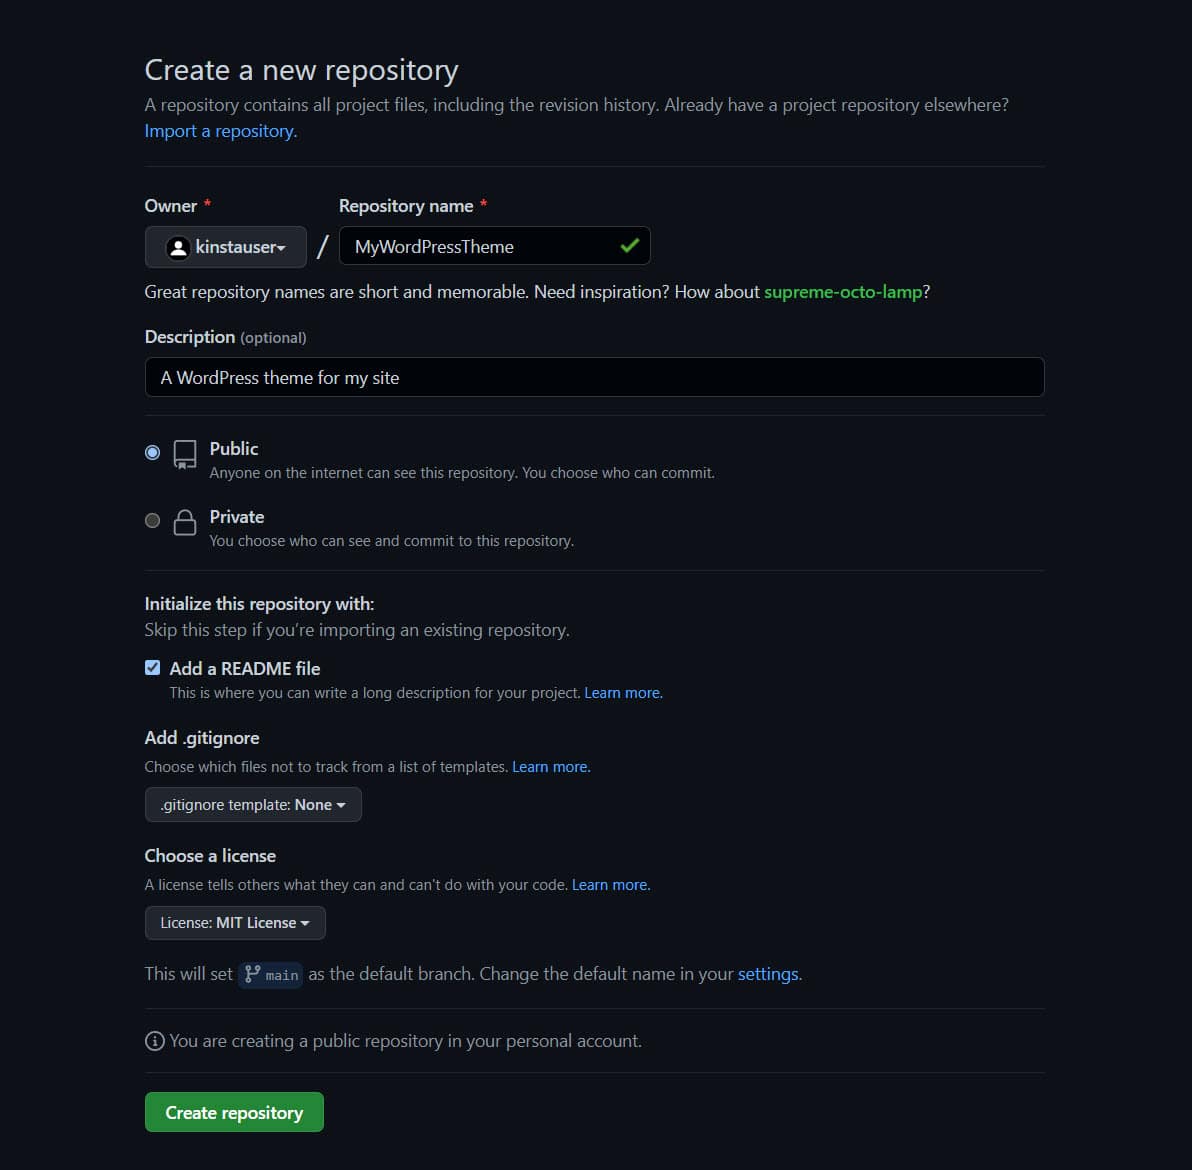 GitHub new repo page with the fields Owner, Repository name, Description, Accessibility, README, and license files.